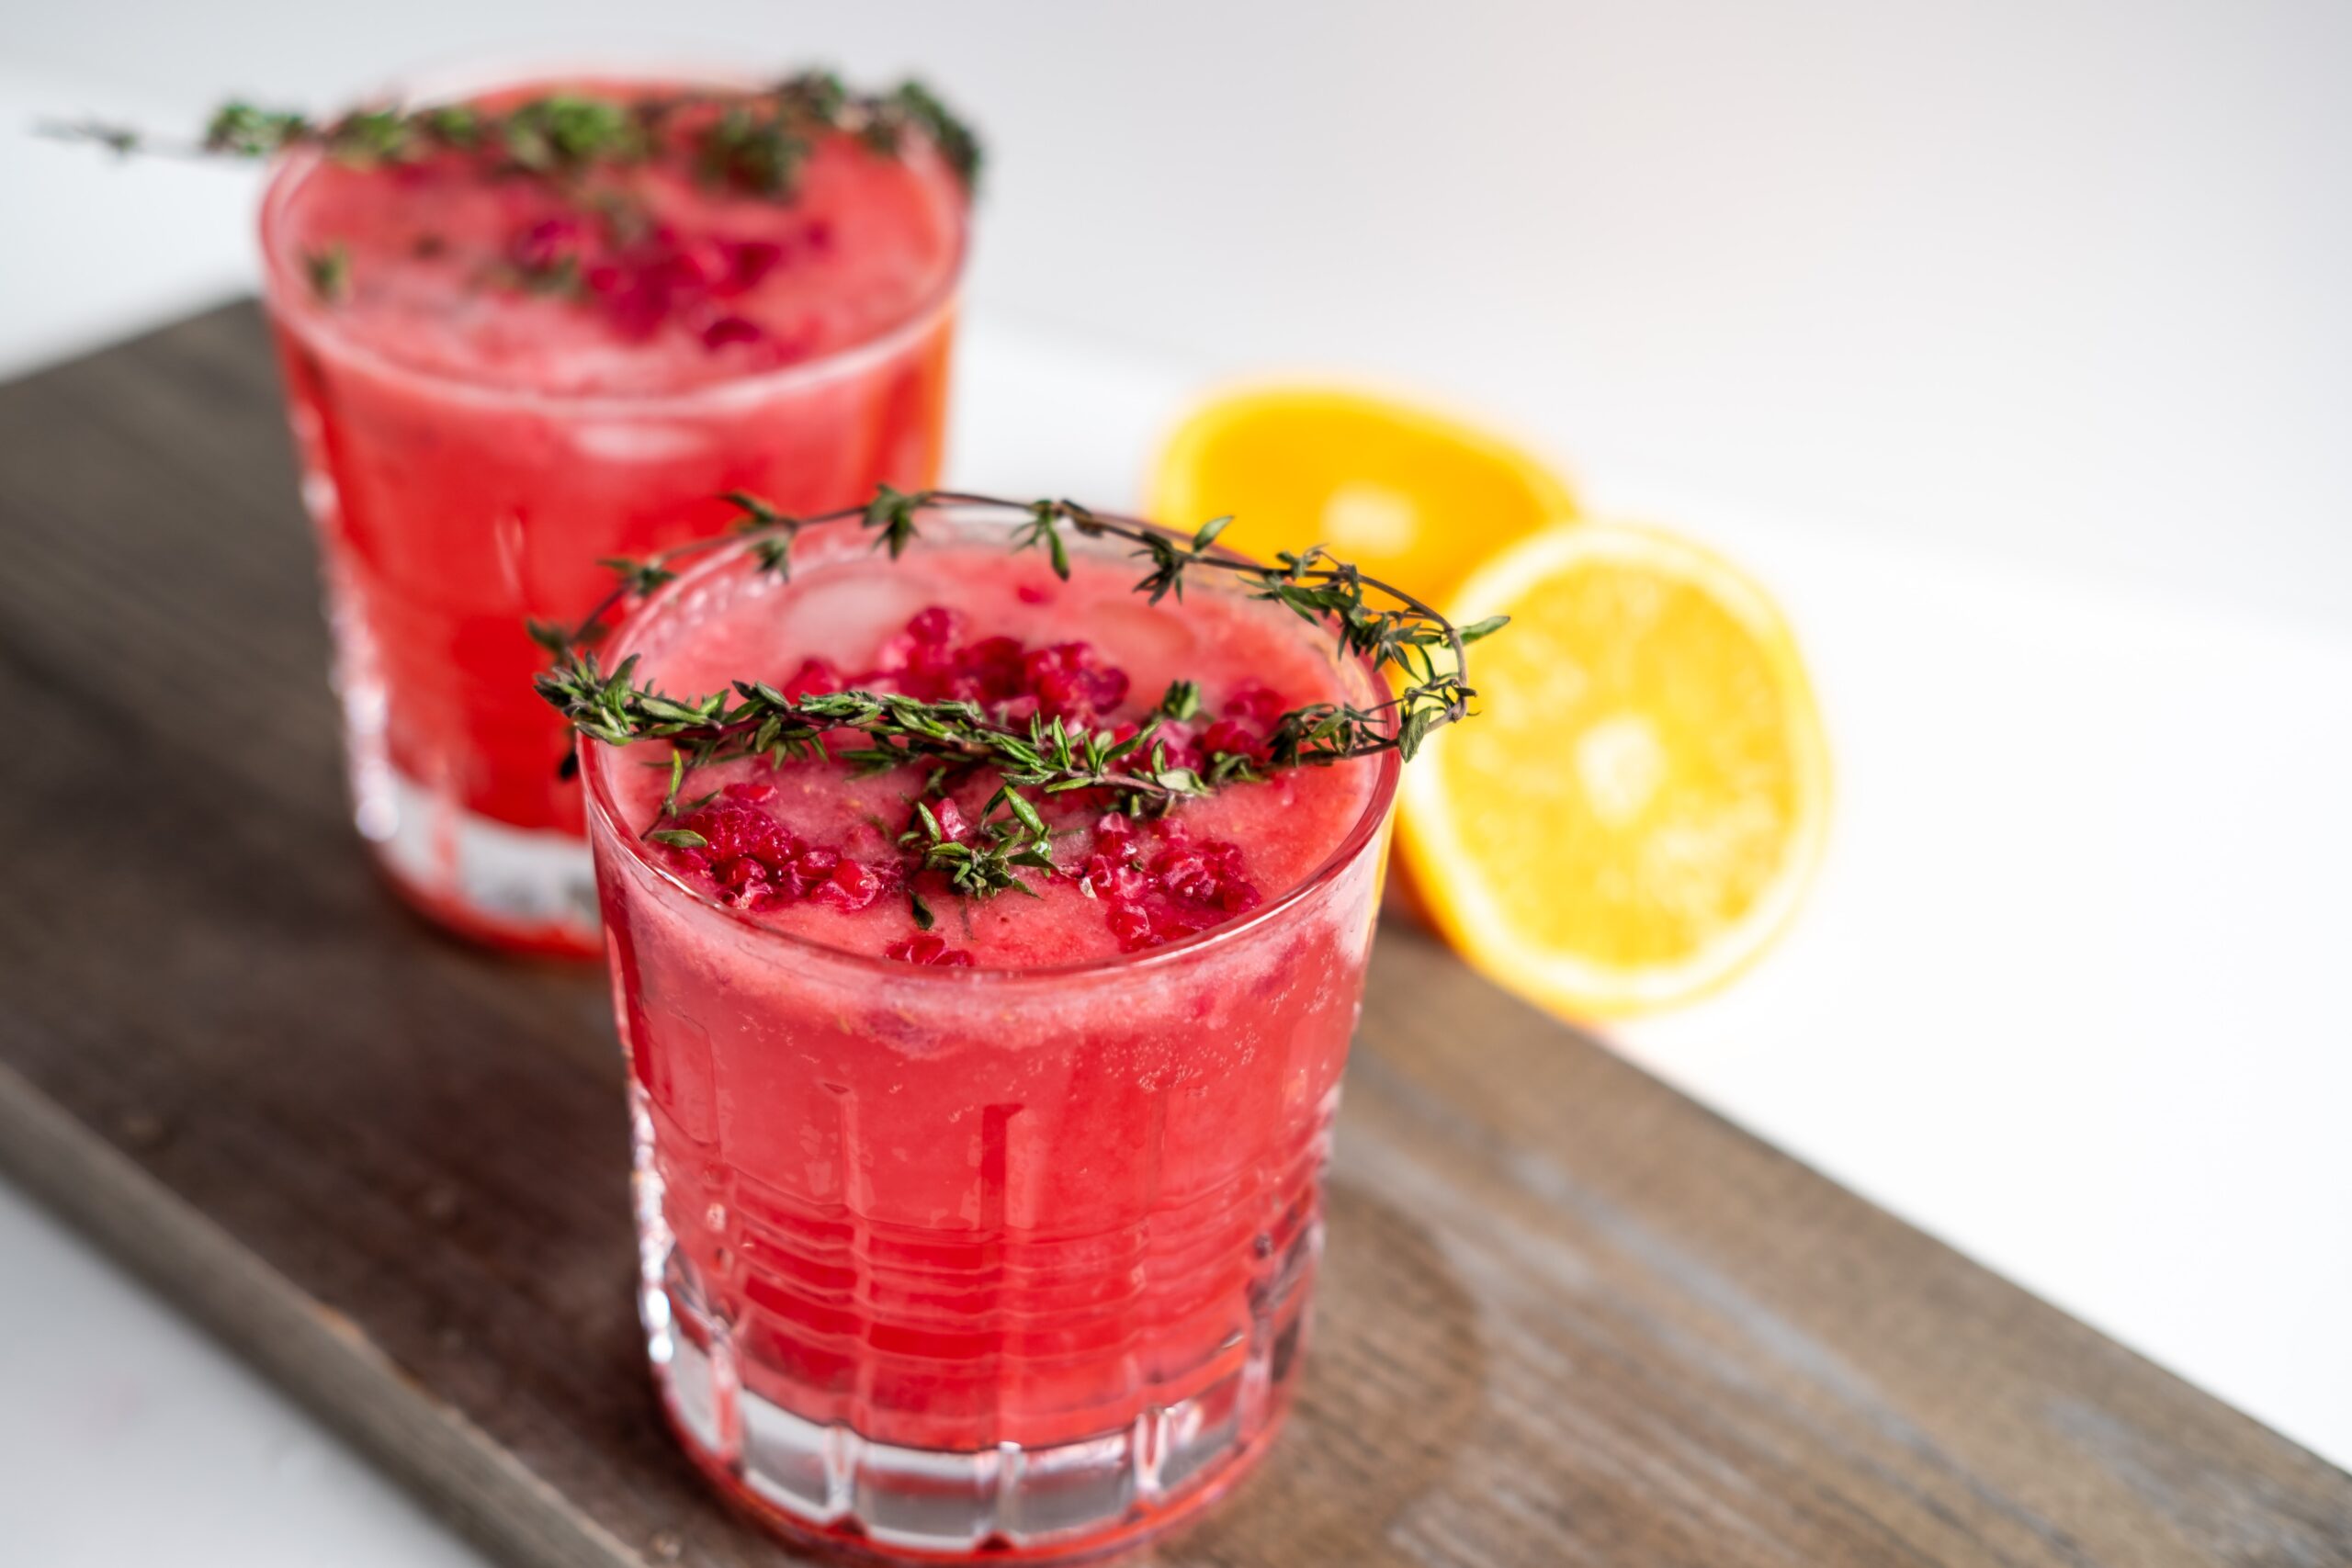 What are the health benefits of a Dry January? Check them out in this article. Pictured: A strawberry drink or mocktail.